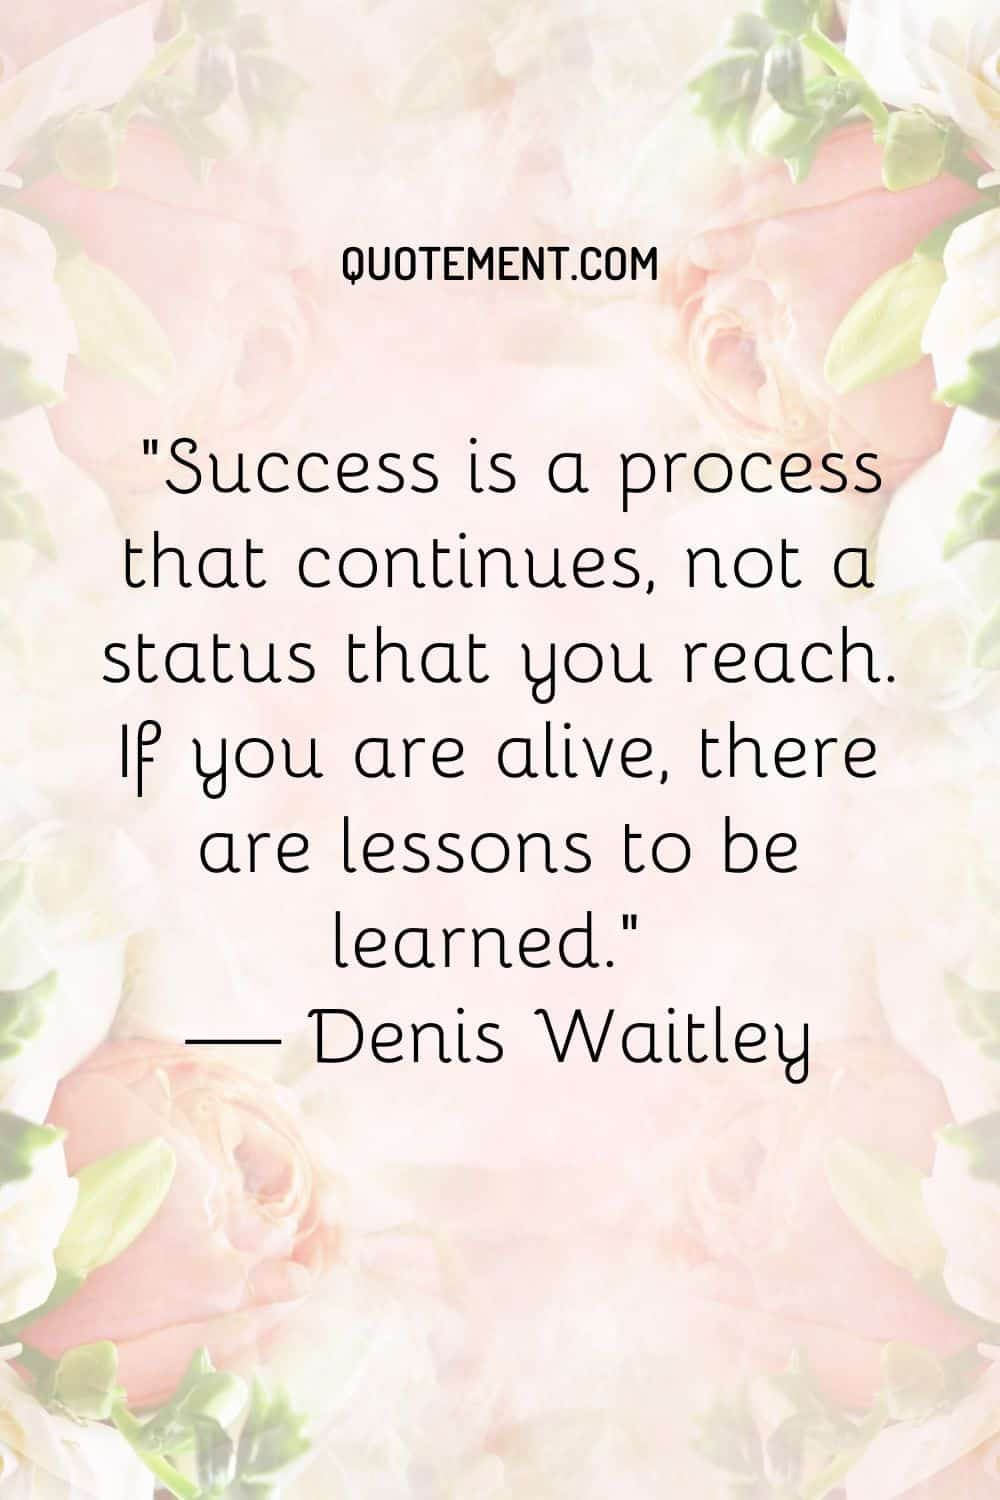 Success is a process that continues, not a status that you reach. If you are alive, there are lessons to be learned